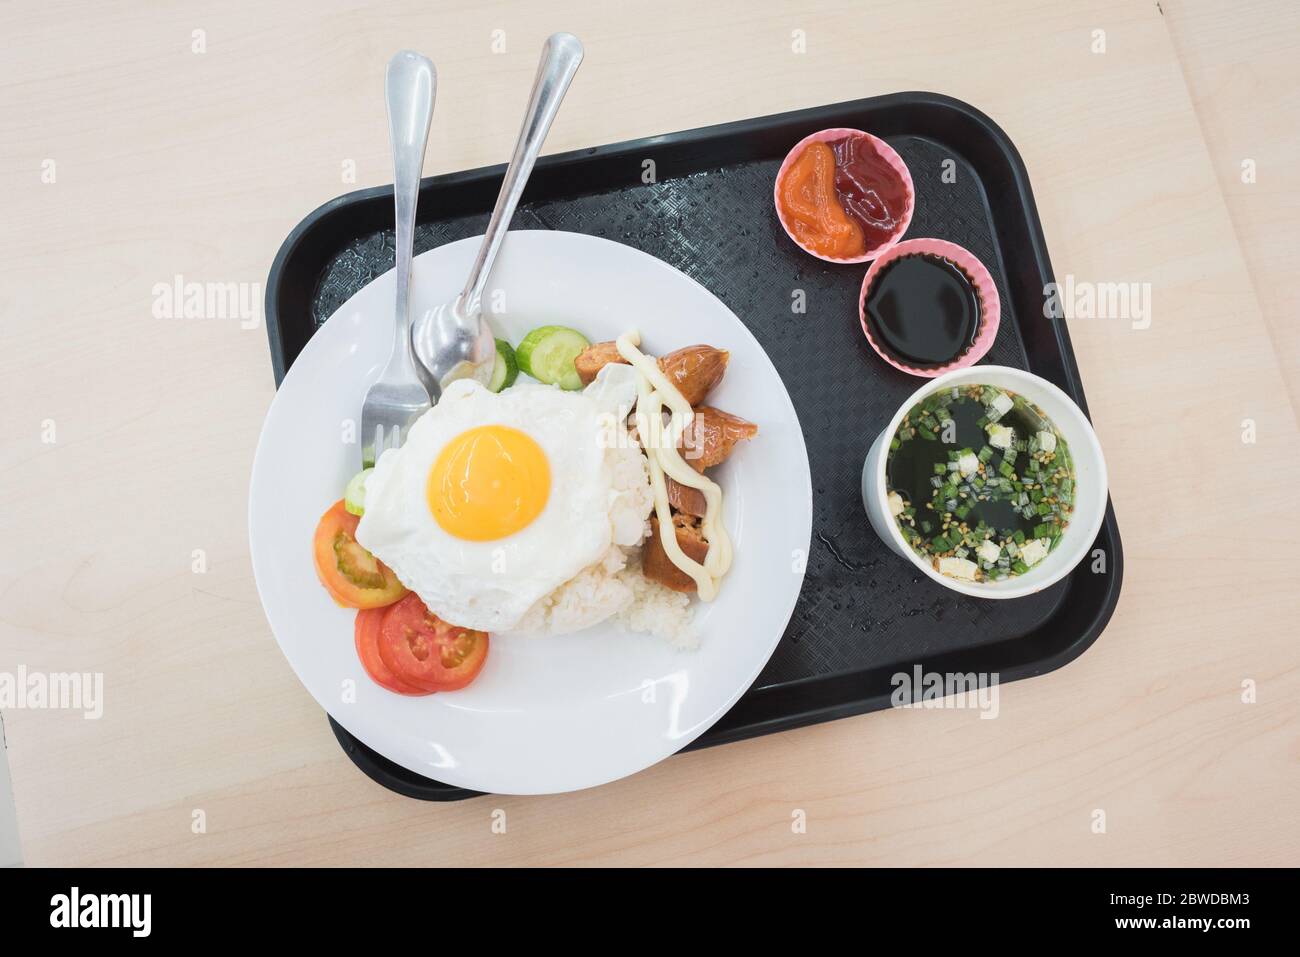 Meal at convenience store's canteen: fried egg and rice, a sausage, seaweed soup & fresh veggies. A closeup, a top-down view of plates on a tray. Stock Photo